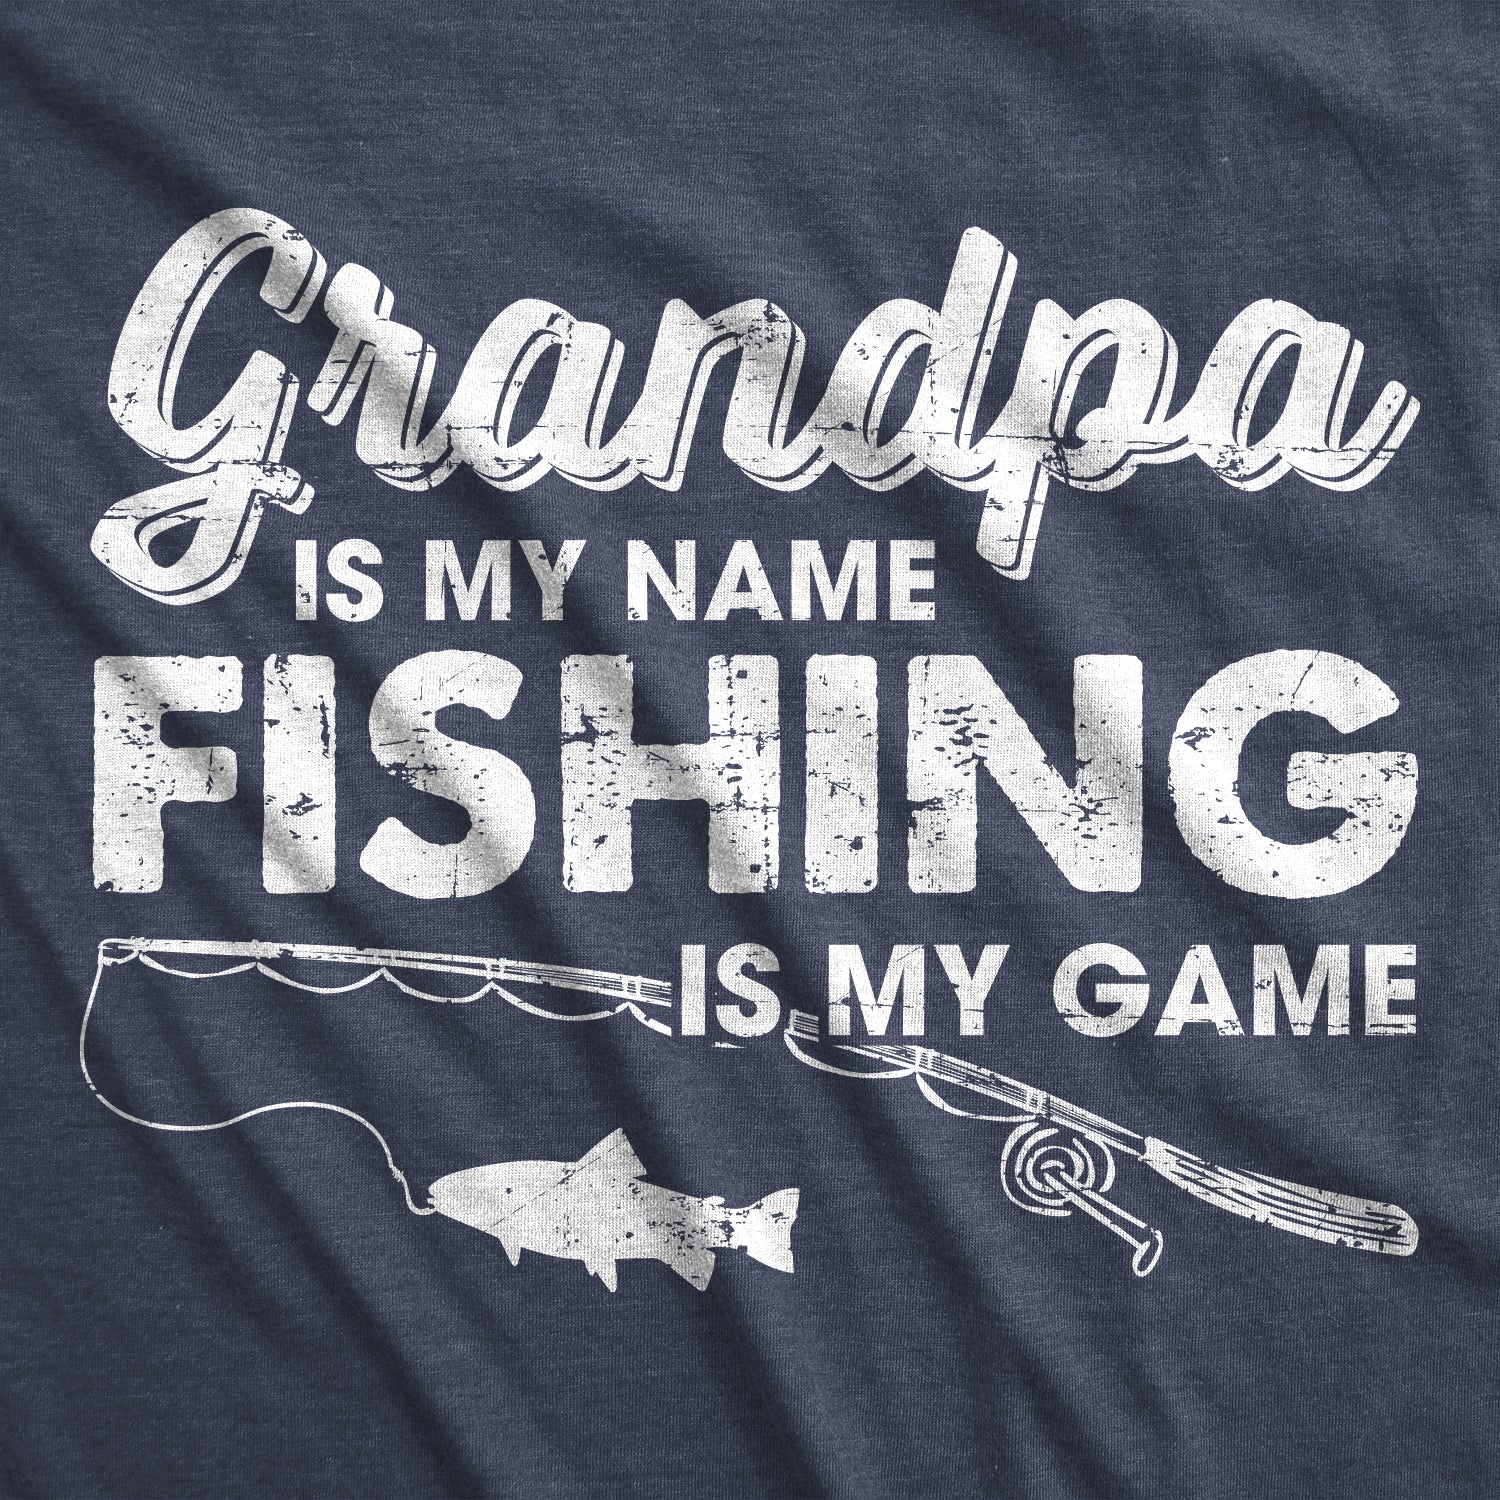 Funny Heather Navy - Grandpa is my Name Grandpa Is My Name And Fishing Is My Game Mens T Shirt Nerdy Father's Day Fishing Grandfather Tee